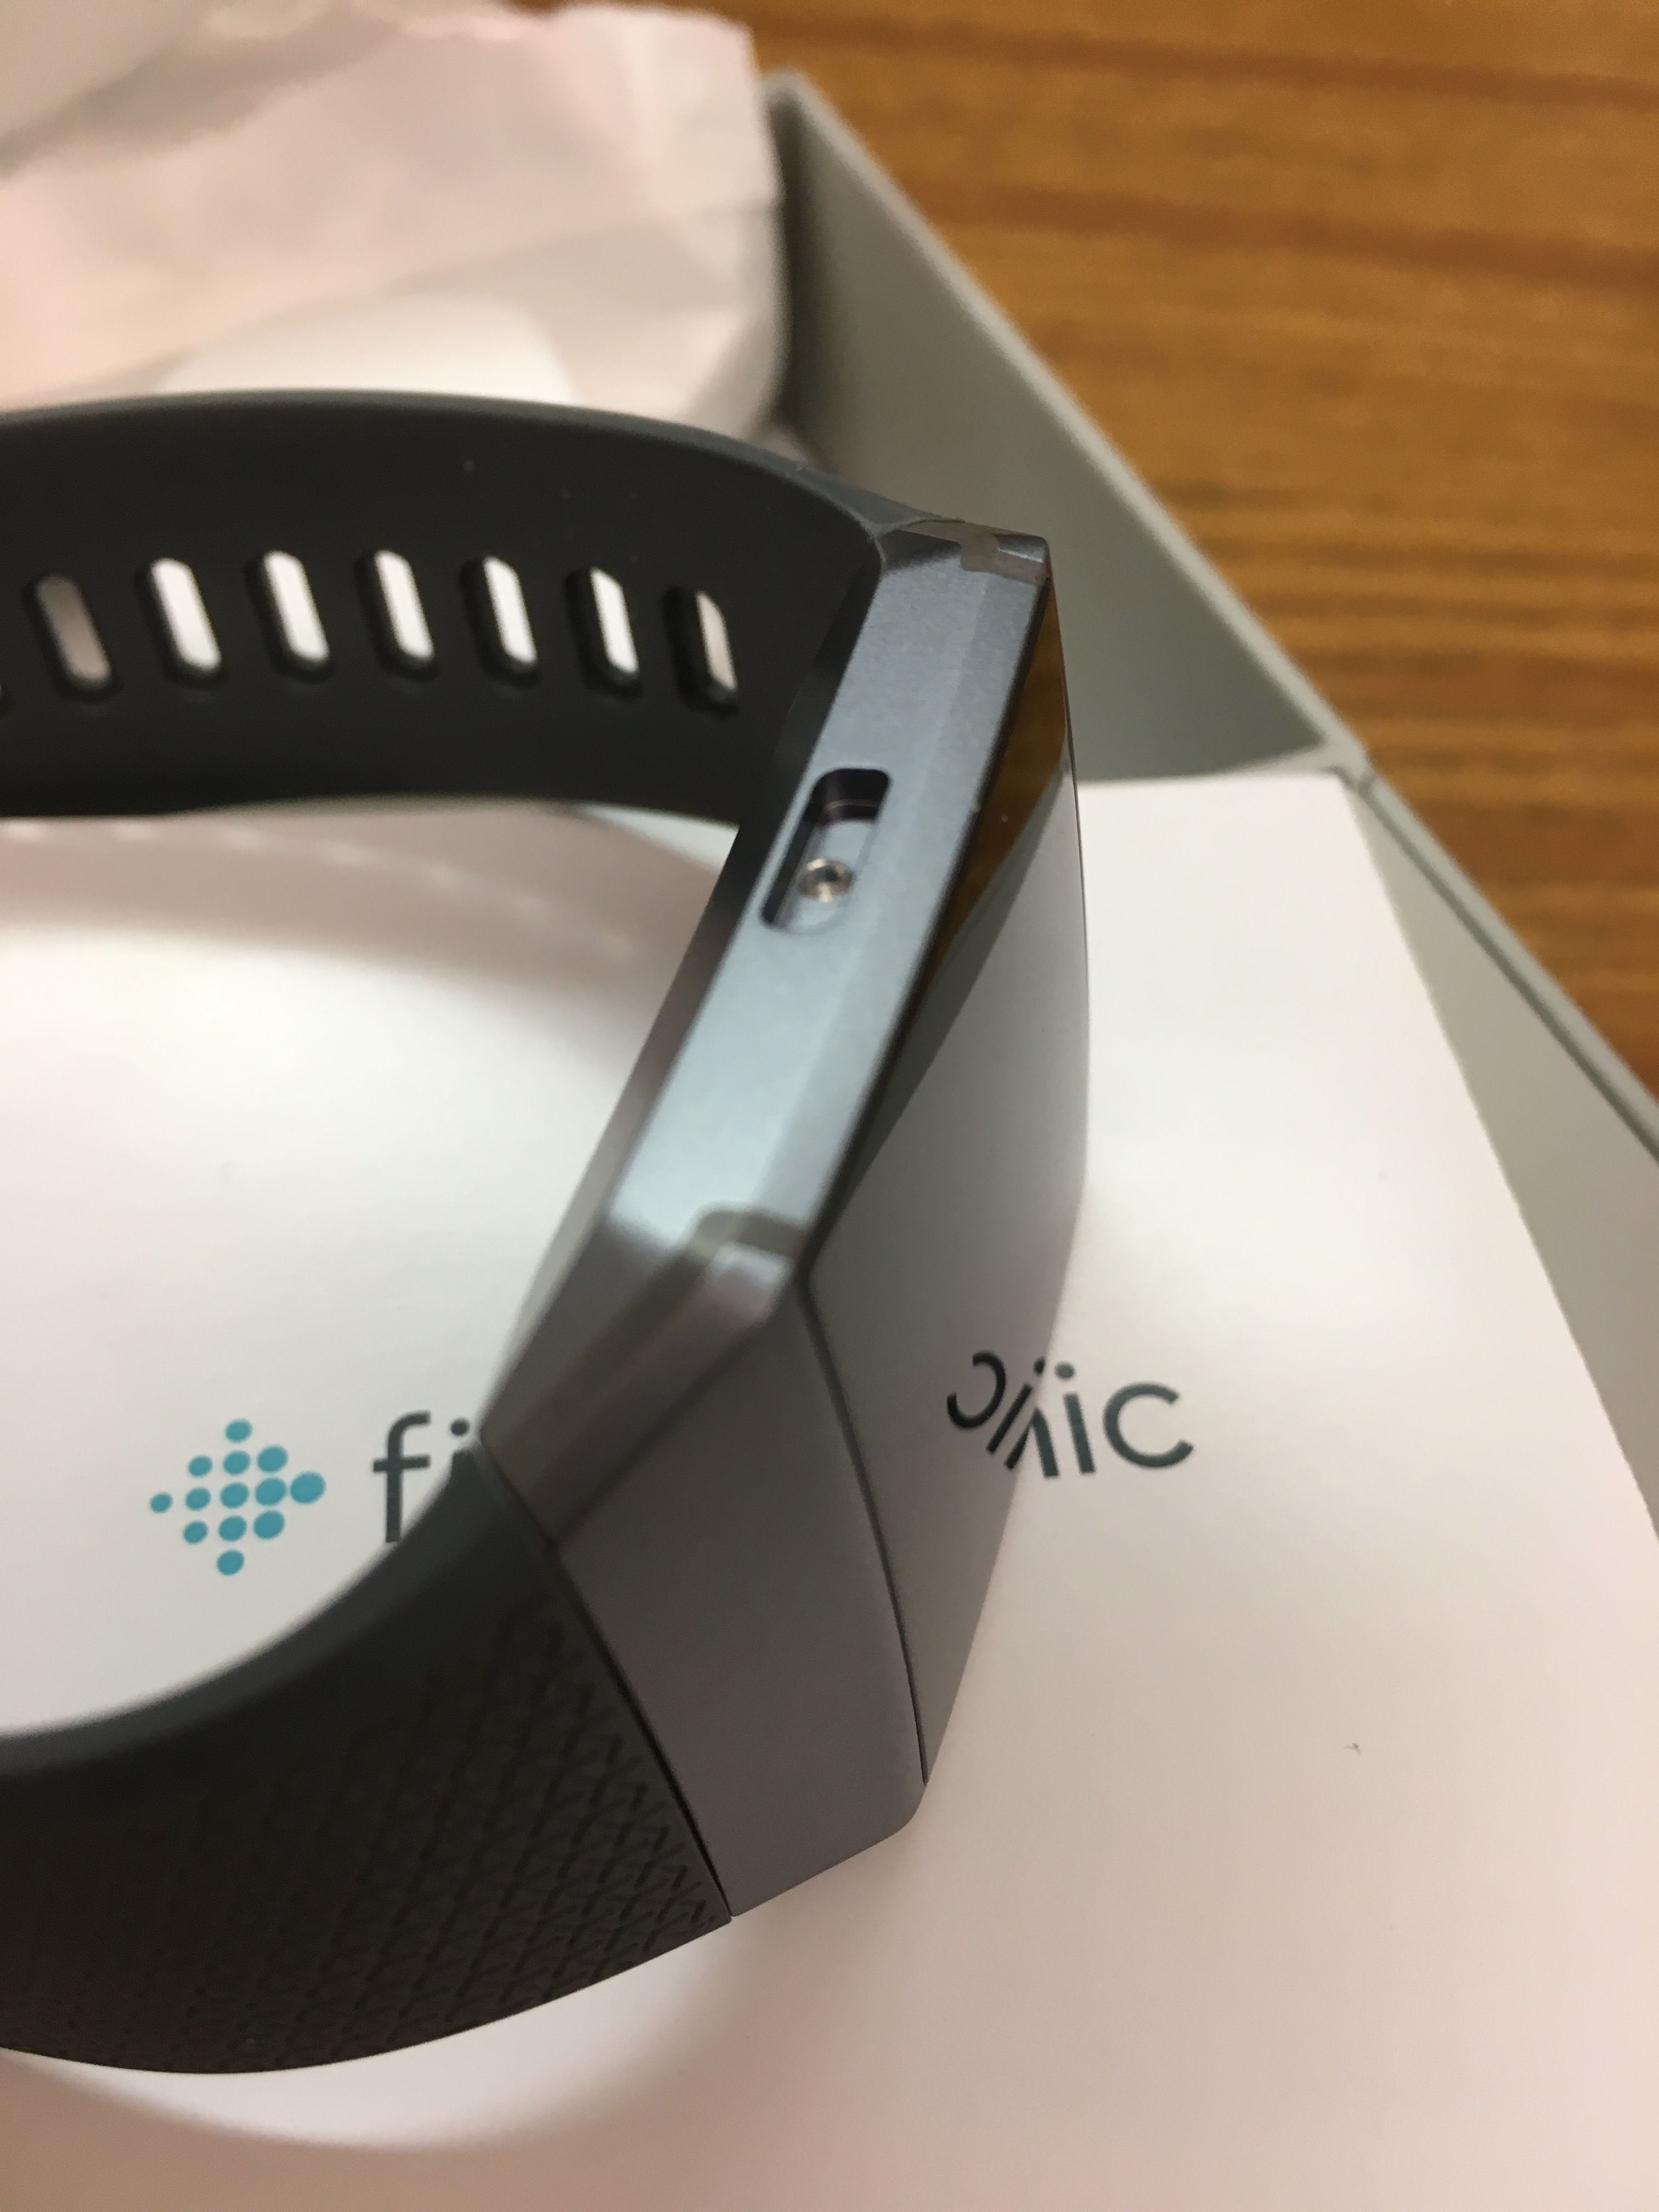 fitbit with no buttons